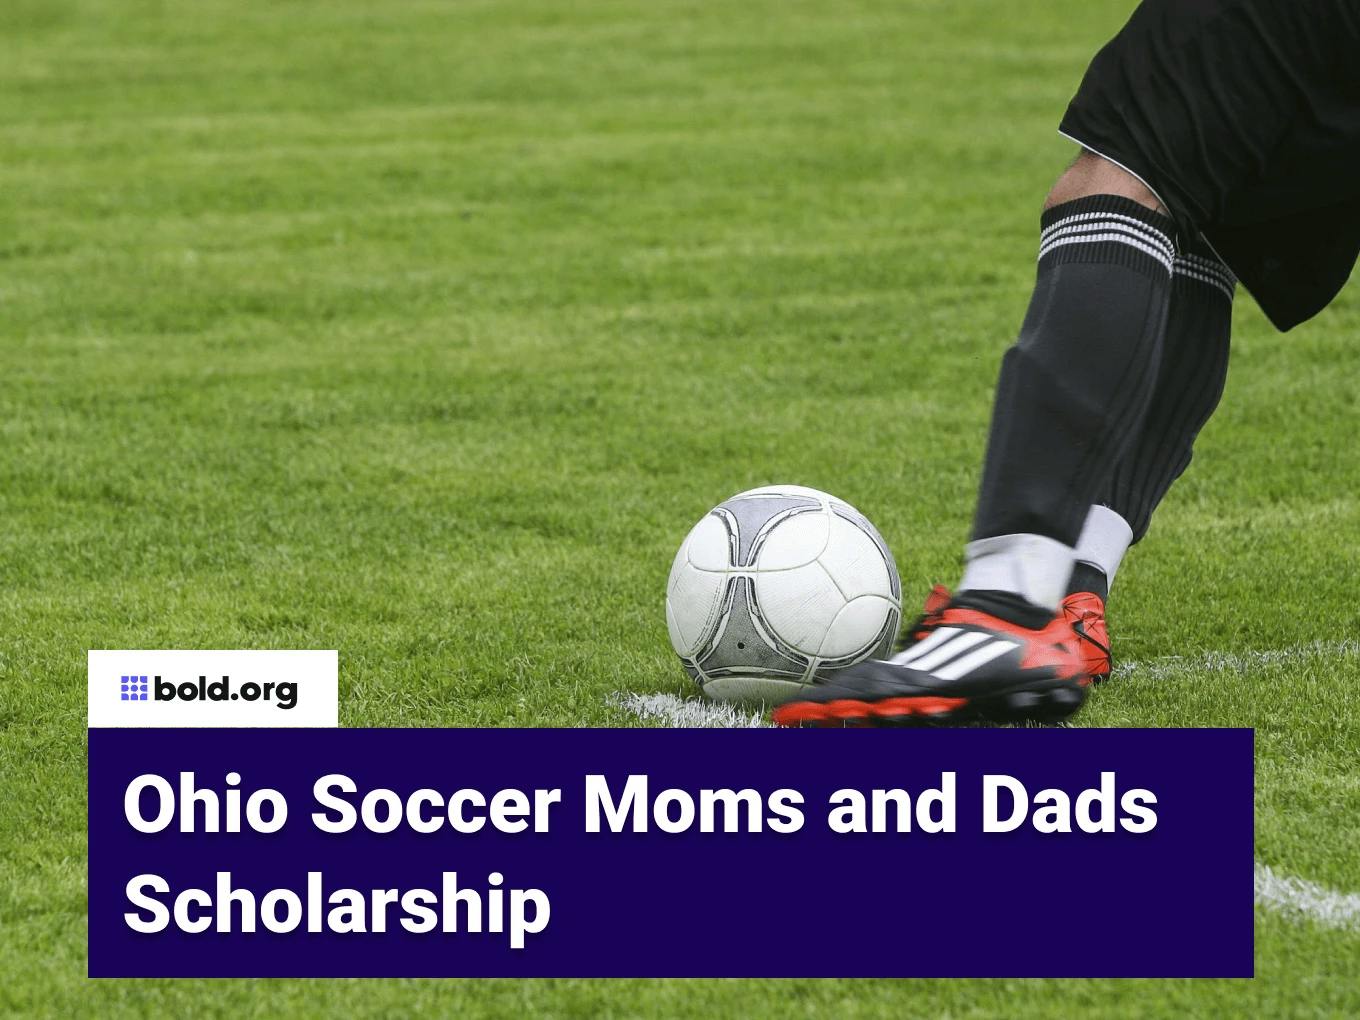 Ohio Soccer Moms and Dads Scholarship